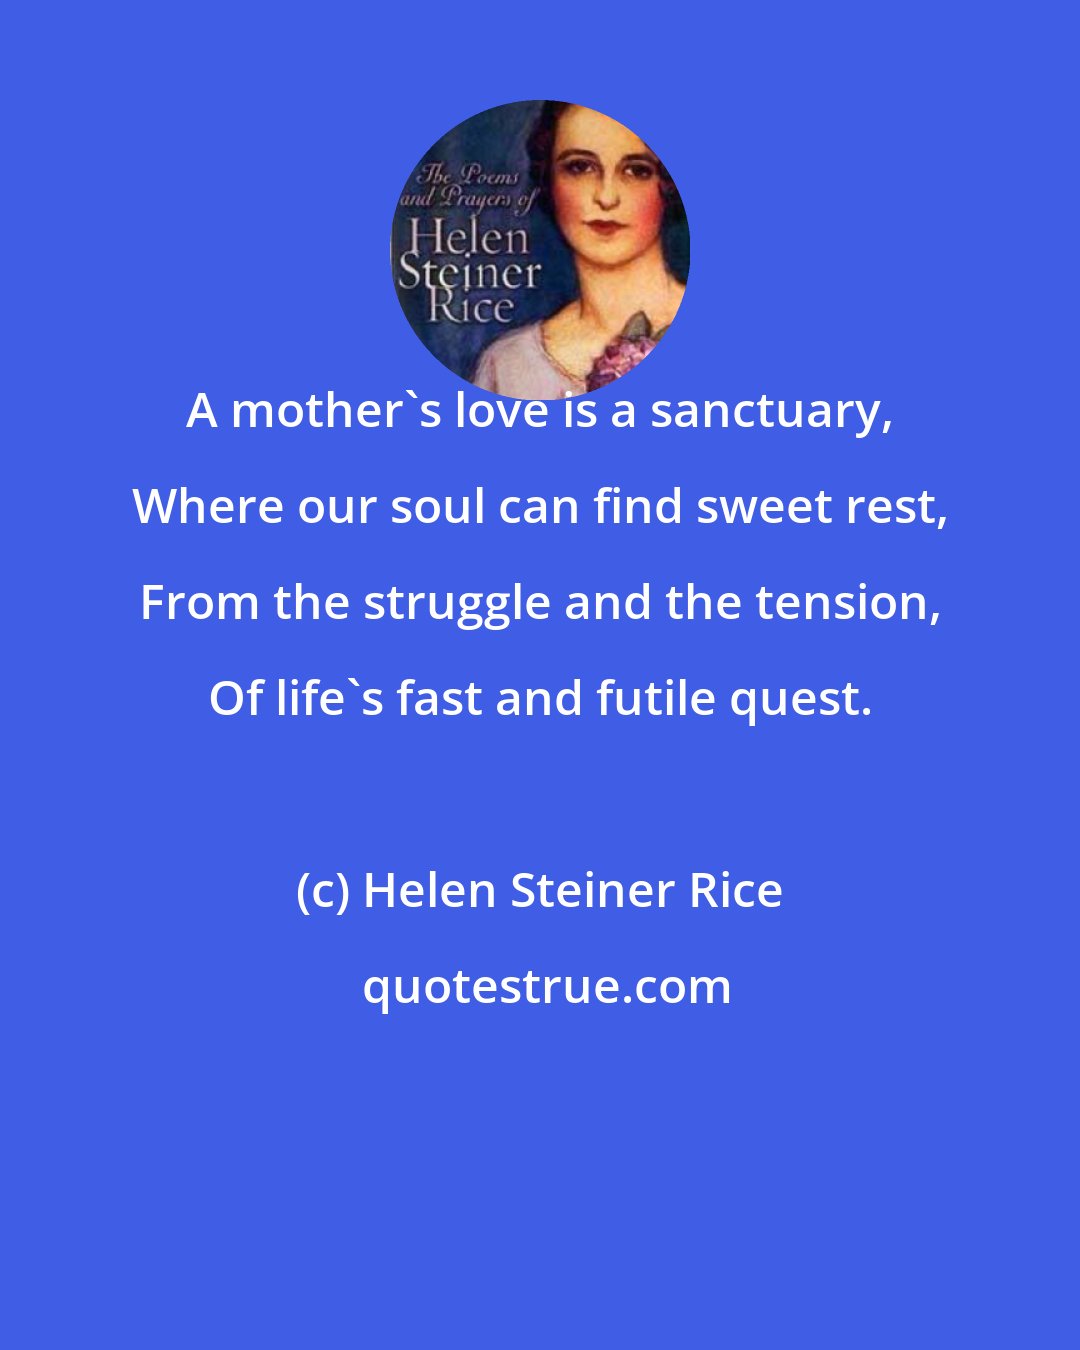 Helen Steiner Rice: A mother's love is a sanctuary, Where our soul can find sweet rest, From the struggle and the tension, Of life's fast and futile quest.